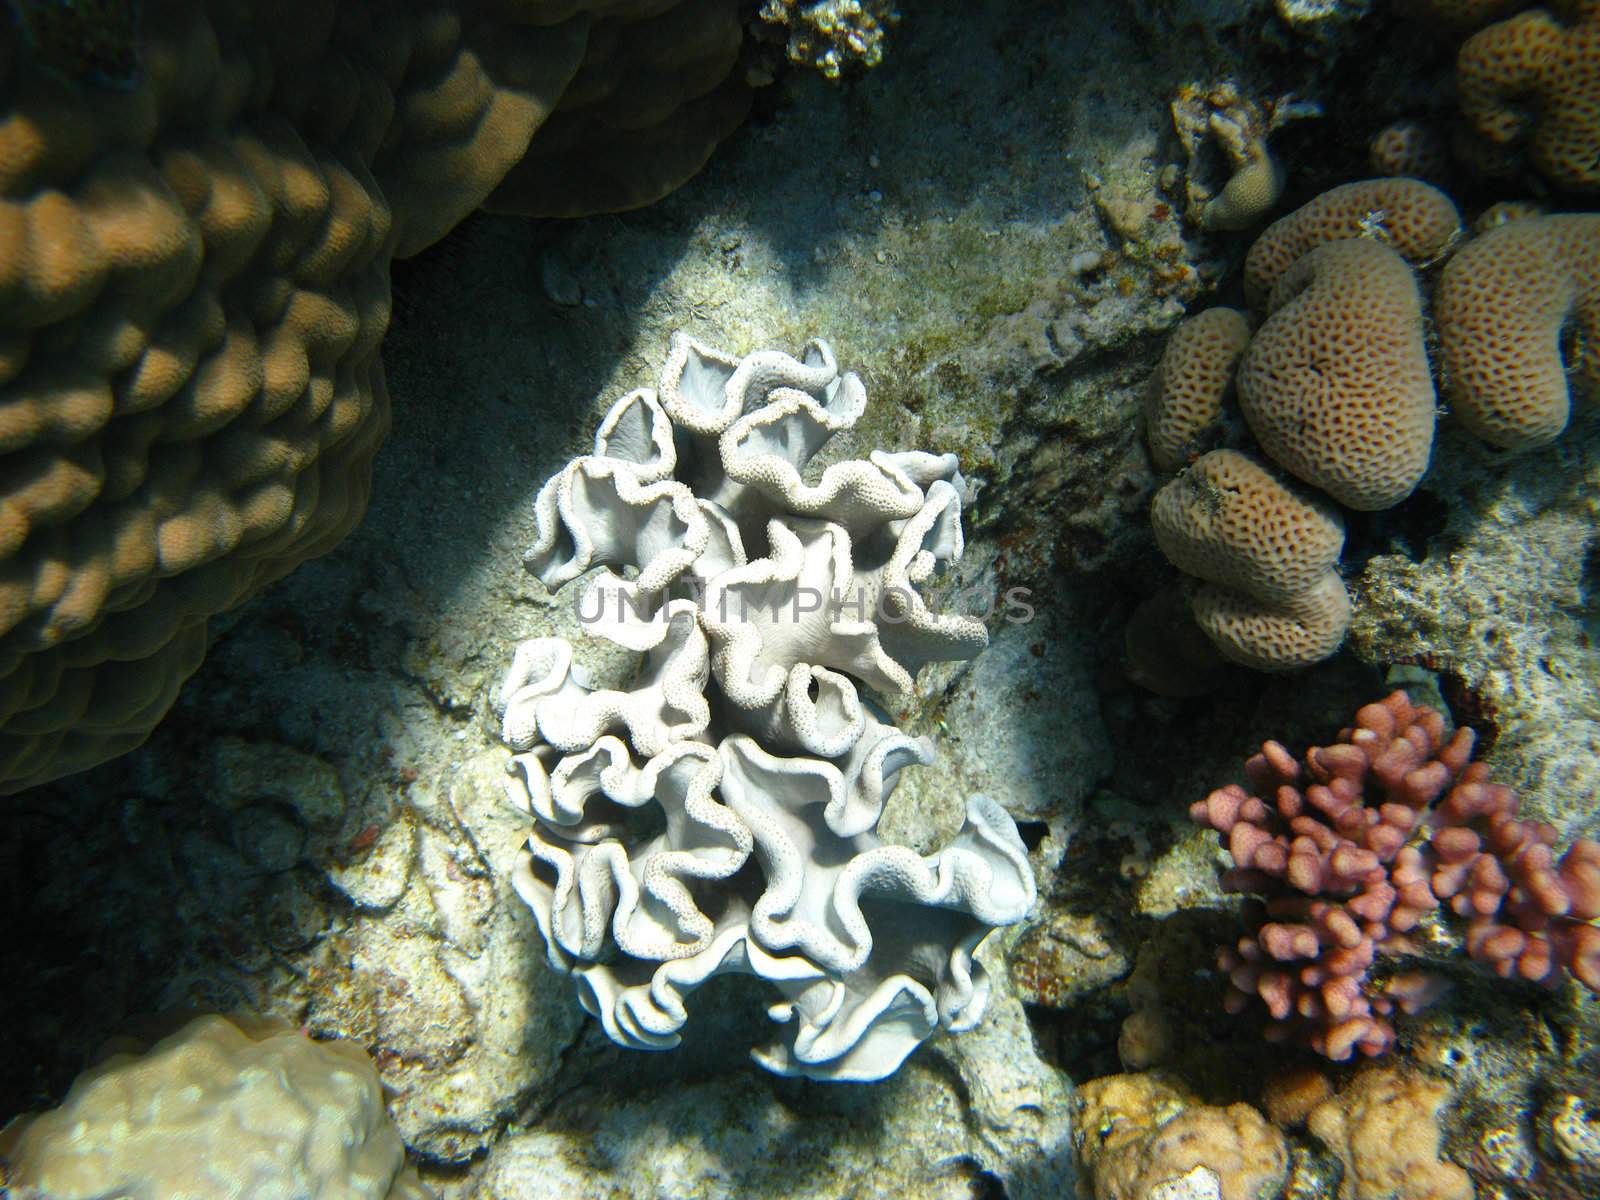 Coral reef in red sea